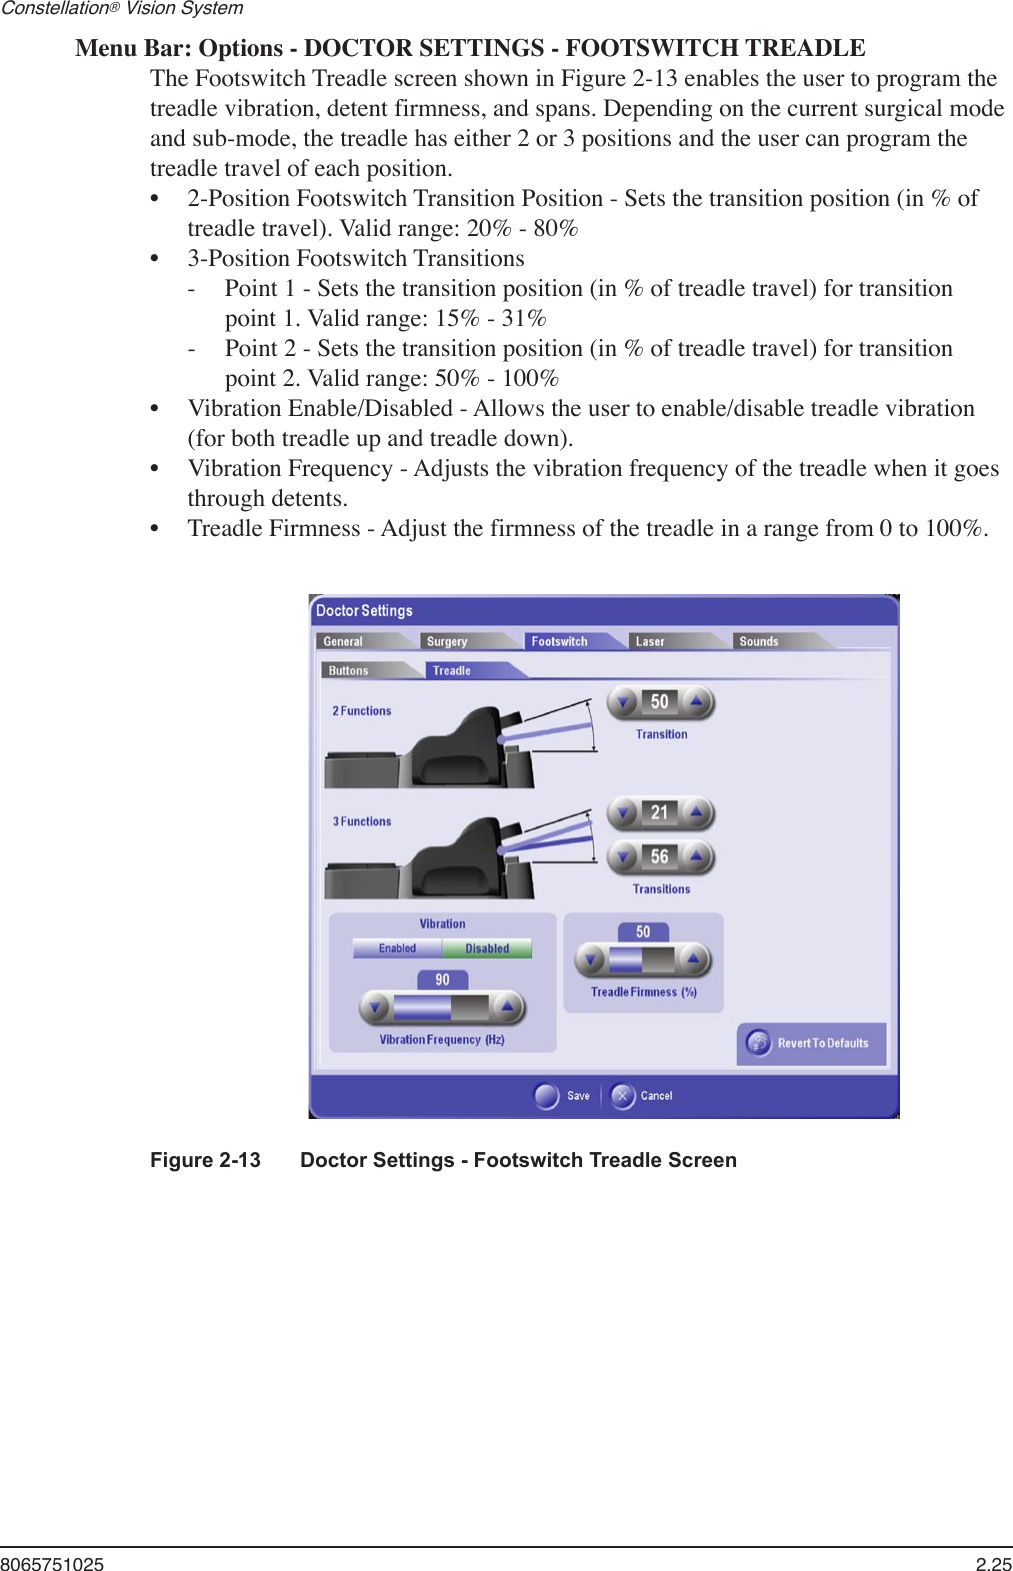 8065751025  2.25Constellation® Vision System Figure 2-13  Doctor Settings - Footswitch Treadle ScreenMenu Bar: Options - DOCTOR SETTINGS - FOOTSWITCH TREADLEThe Footswitch Treadle screen shown in Figure 2-13 enables the user to program the treadle vibration, detent firmness, and spans. Depending on the current surgical mode and sub-mode, the treadle has either 2 or 3 positions and the user can program the treadle travel of each position. 2-Position Footswitch Transition Position - Sets the transition position (in % of treadle travel). Valid range: 20% - 80%3-Position Footswitch Transitions  -  Point 1 - Sets the transition position (in % of treadle travel) for transition    point 1. Valid range: 15% - 31% -  Point 2 - Sets the transition position (in % of treadle travel) for transition    point 2. Valid range: 50% - 100%Vibration Enable/Disabled - Allows the user to enable/disable treadle vibration (for both treadle up and treadle down).  Vibration Frequency - Adjusts the vibration frequency of the treadle when it goes through detents.Treadle Firmness - Adjust the firmness of the treadle in a range from 0 to 100%.•••••